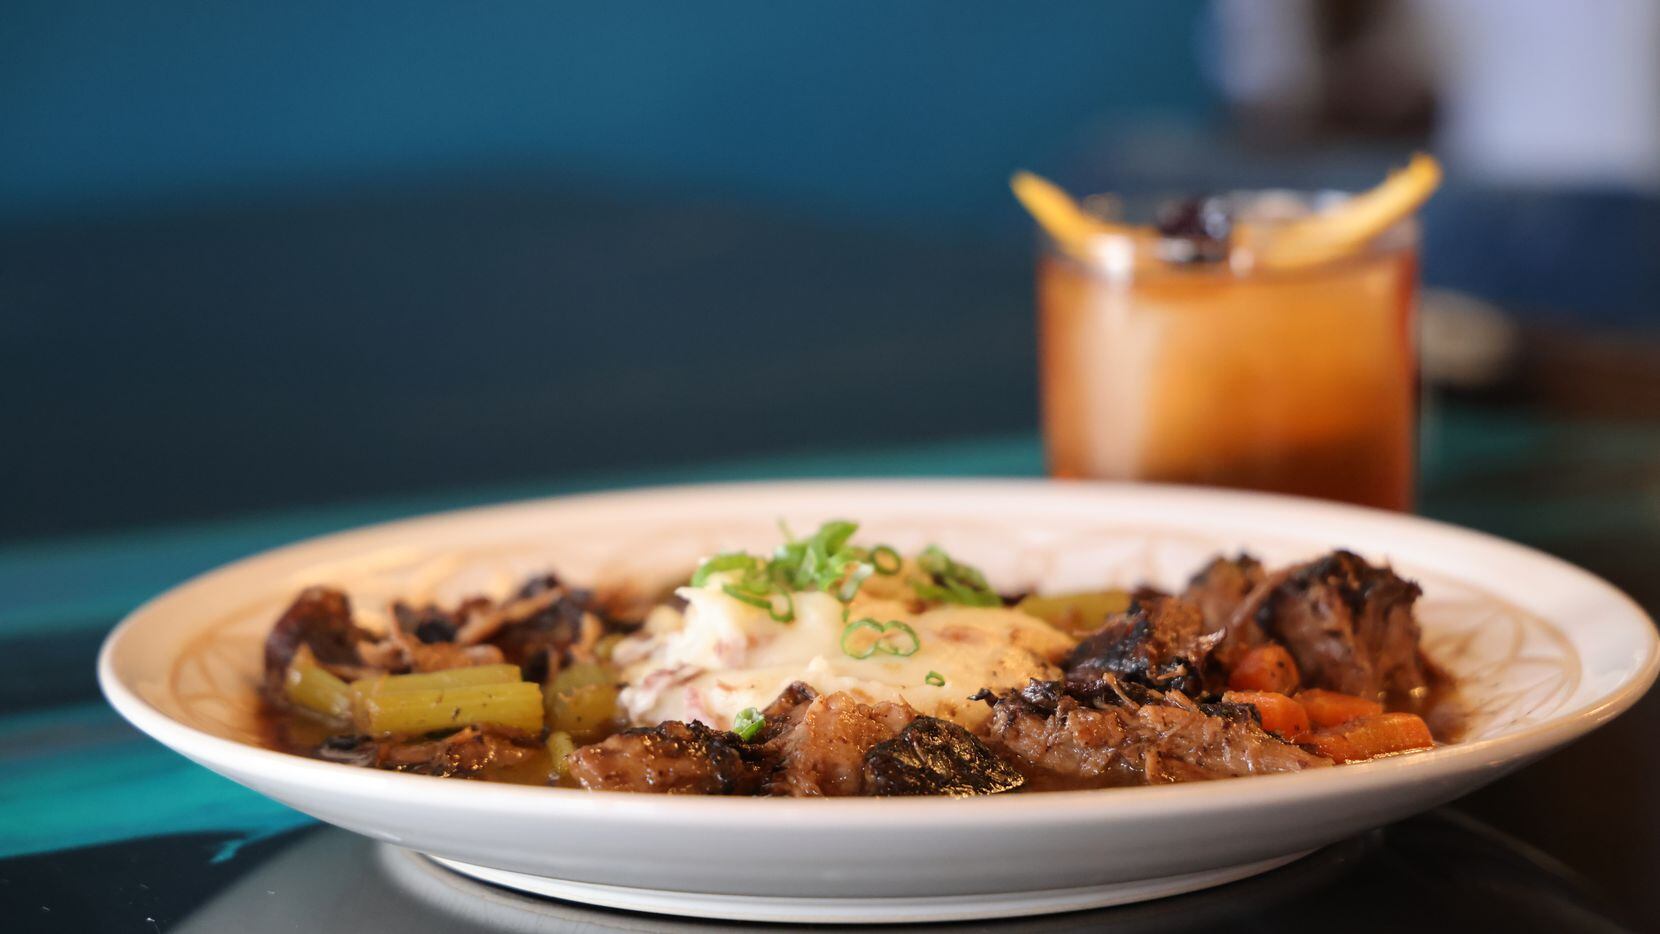 Chet's Dallas is an Irish-American restaurant that opened Nov. 30, 2021 in the West End. Shepard's pie is on the menu.